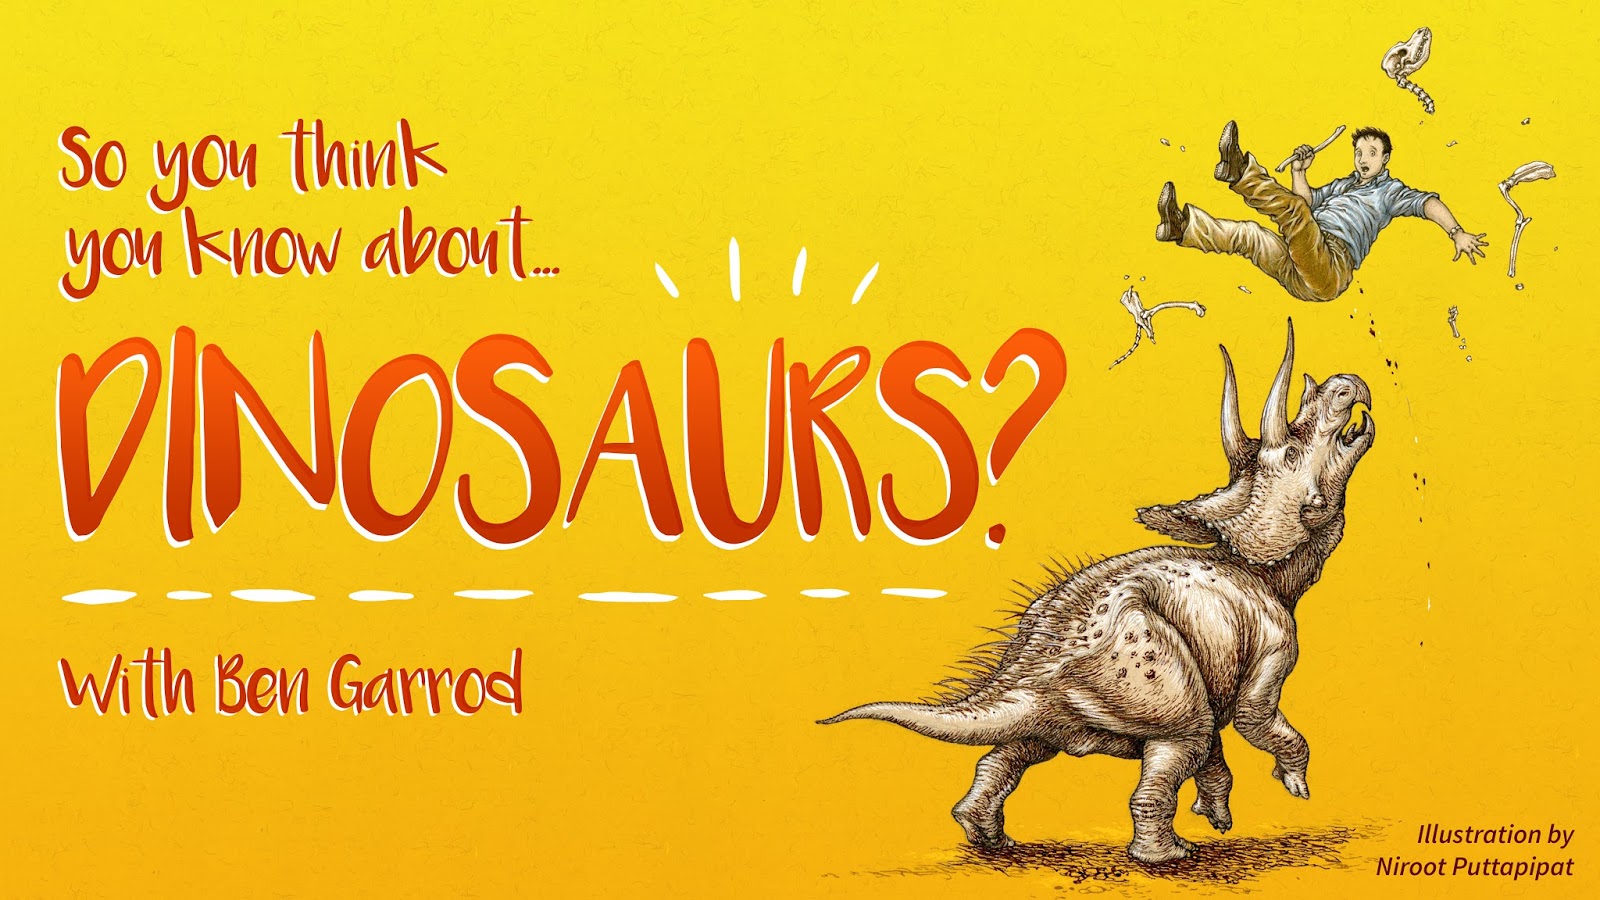 Kids Love Dinosaurs? Check Out 'So you think you know about Dinosaurs' at Tyne Theatre & Opera House in Newcastle with TV Scientist Ben Garrod this February Half Term. Plus your chance to win tickets! 